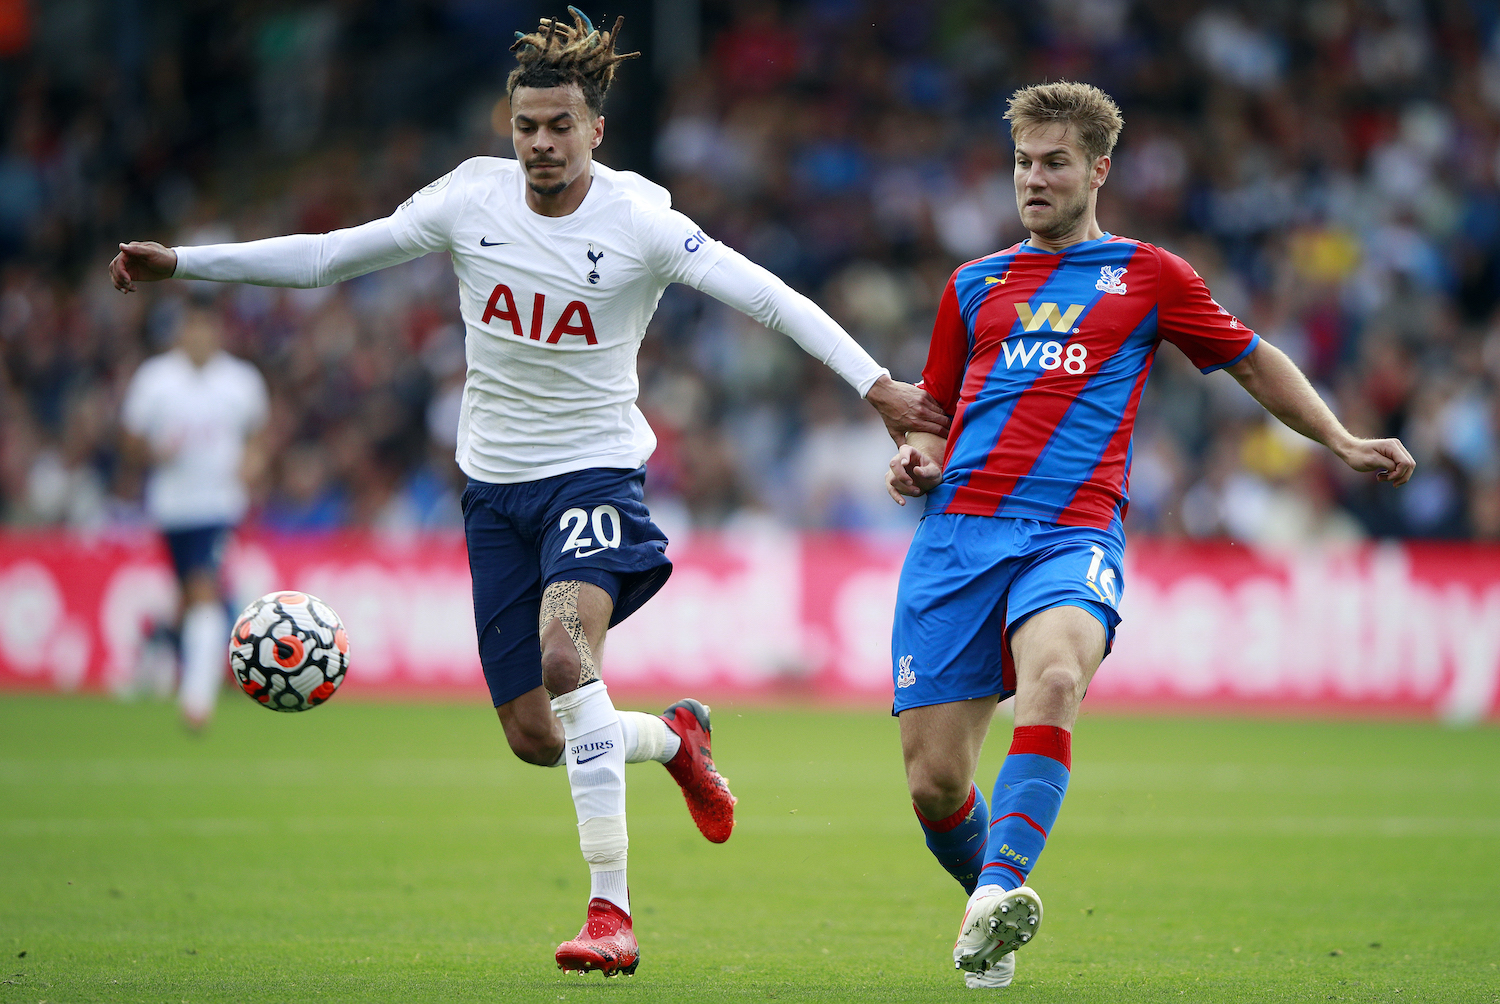 Palace end Spurs' perfect run